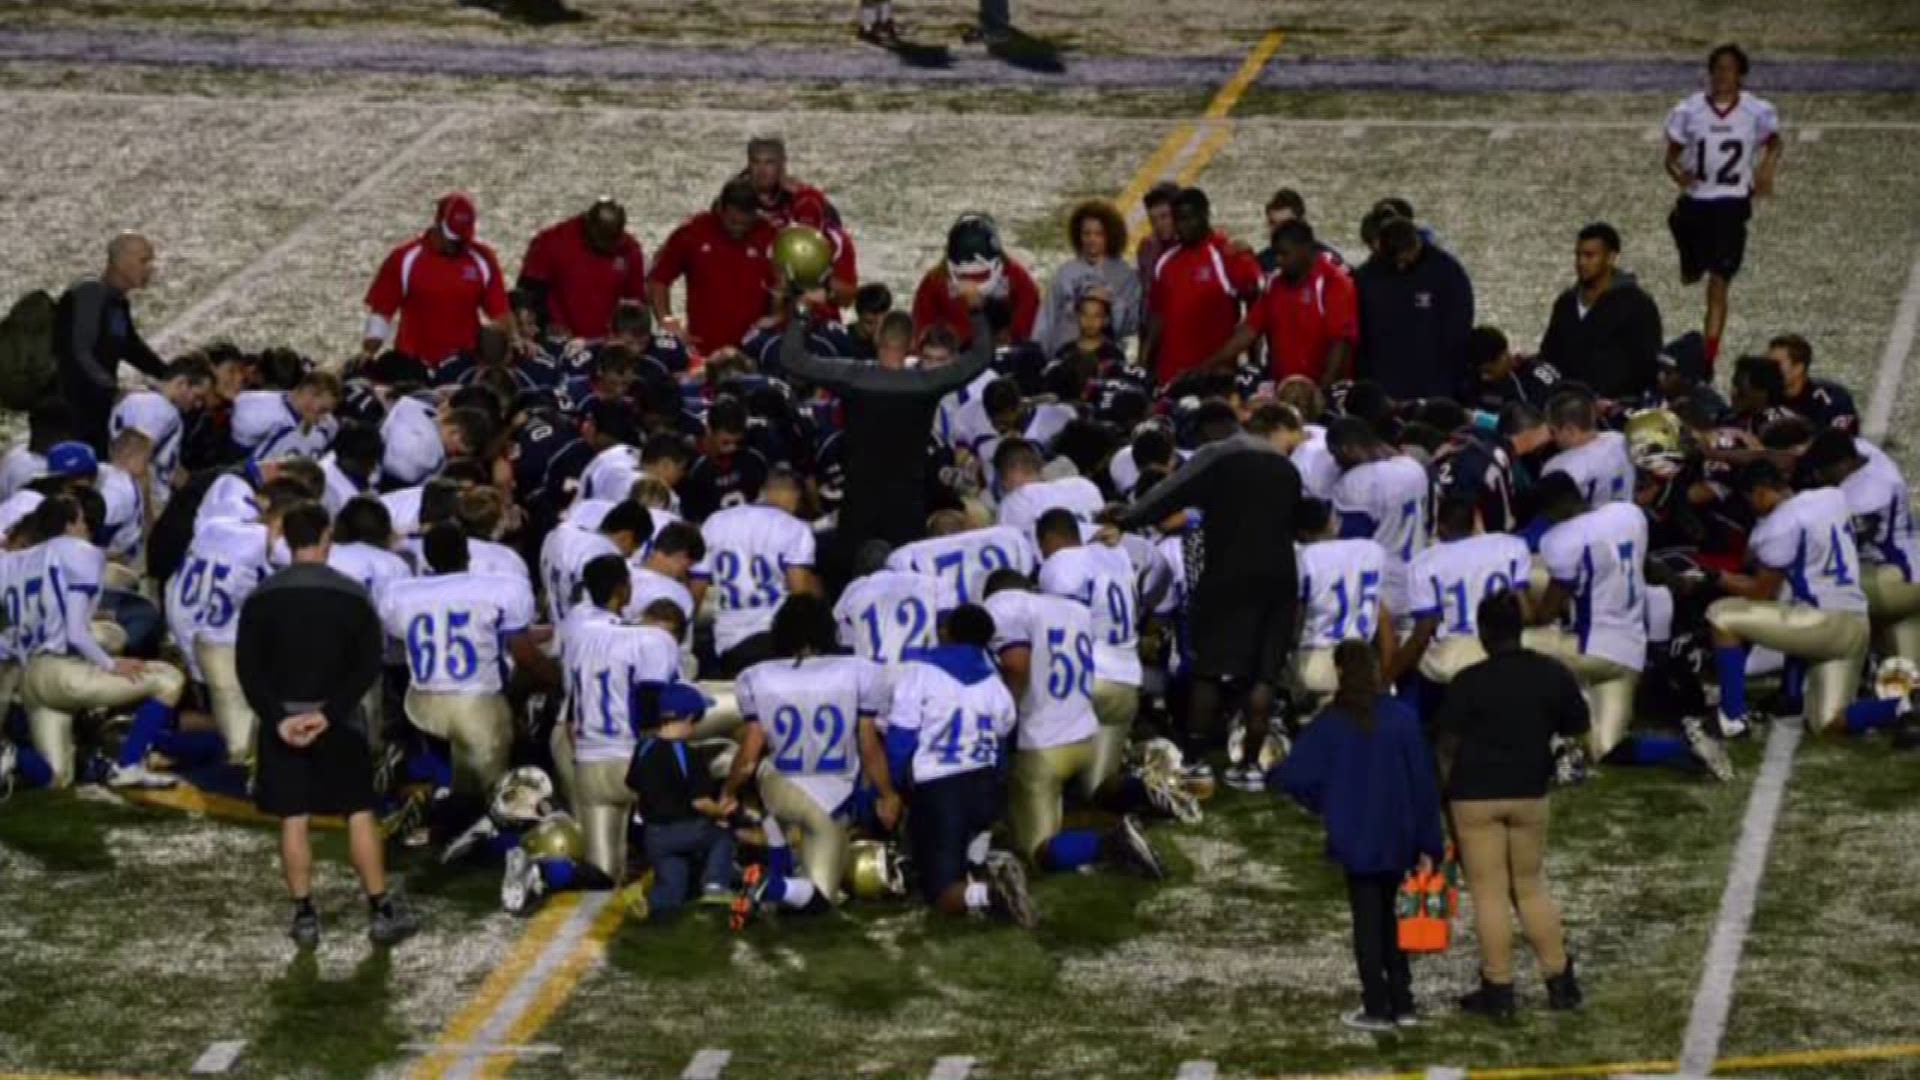 A Bremerton football coach is on paid leave for leading prayers with his players after games.